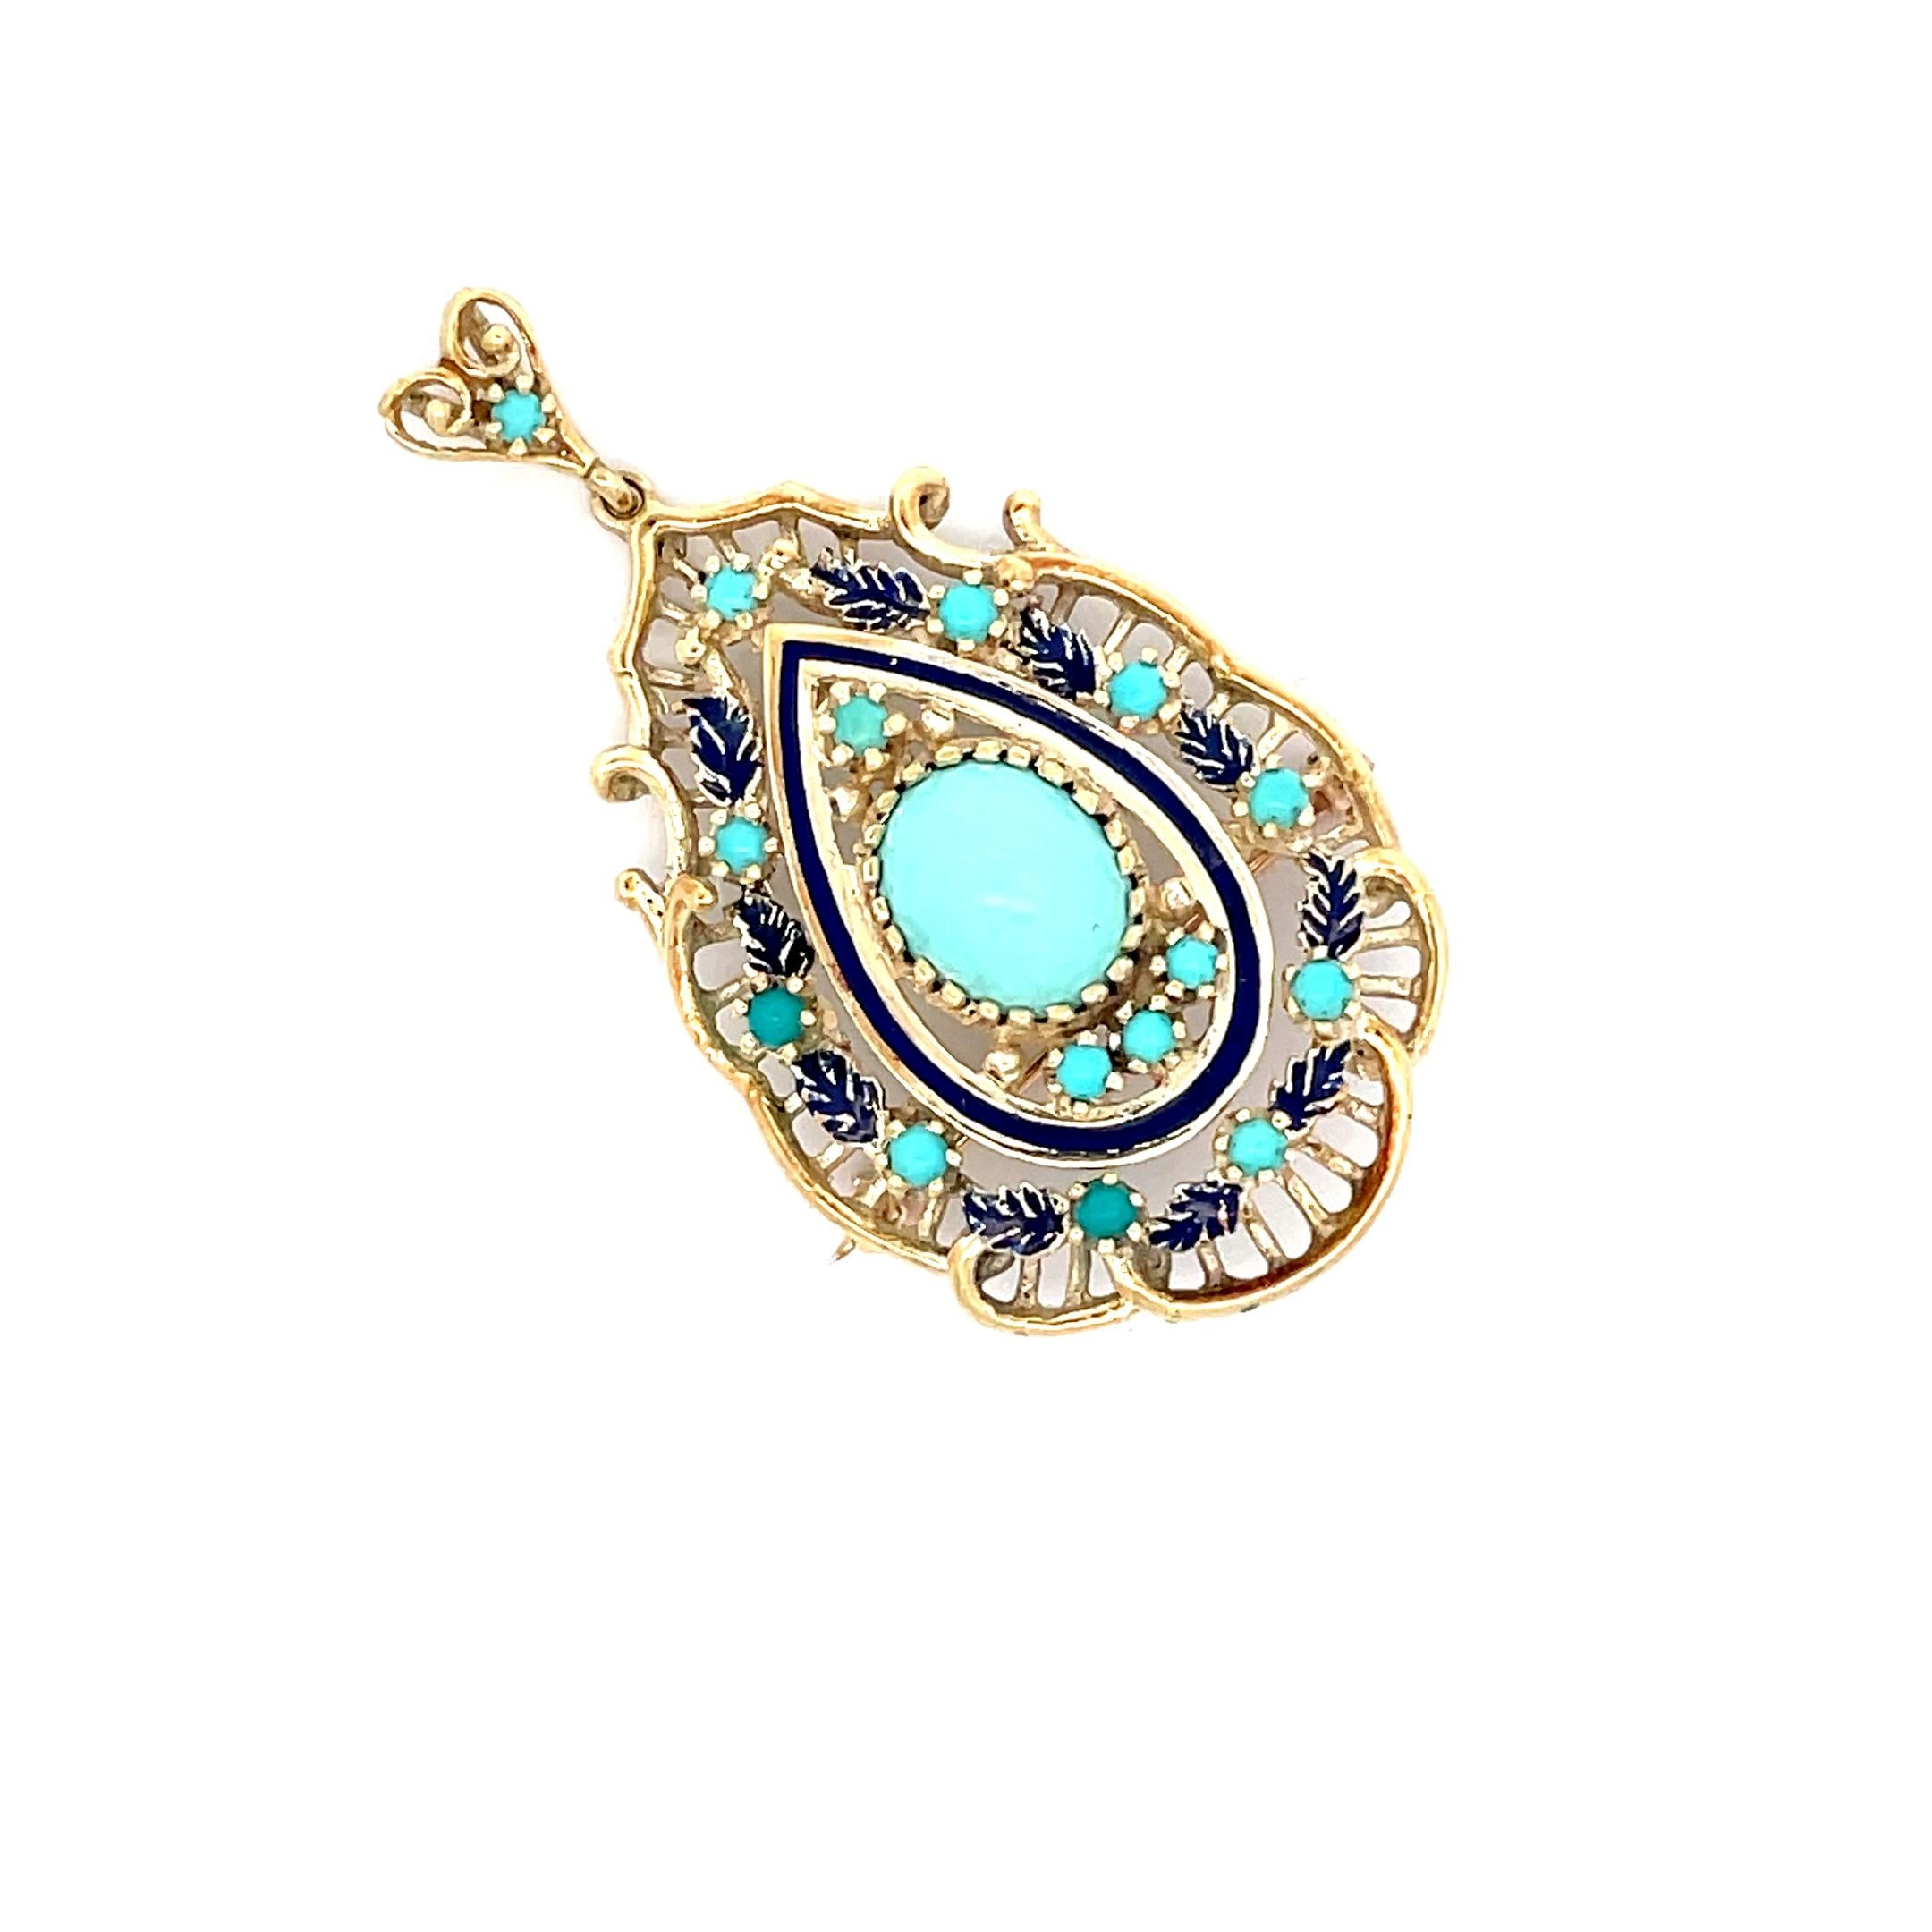 This is a stunning, 1950s Retro, 14k yellow gold pin/pendant featuring blue enamel and turquoise. The pendant features 15 small round turquoise and dark blue enamel flowers, giving this pin beautiful contrast between the blue, turquoise and 14k